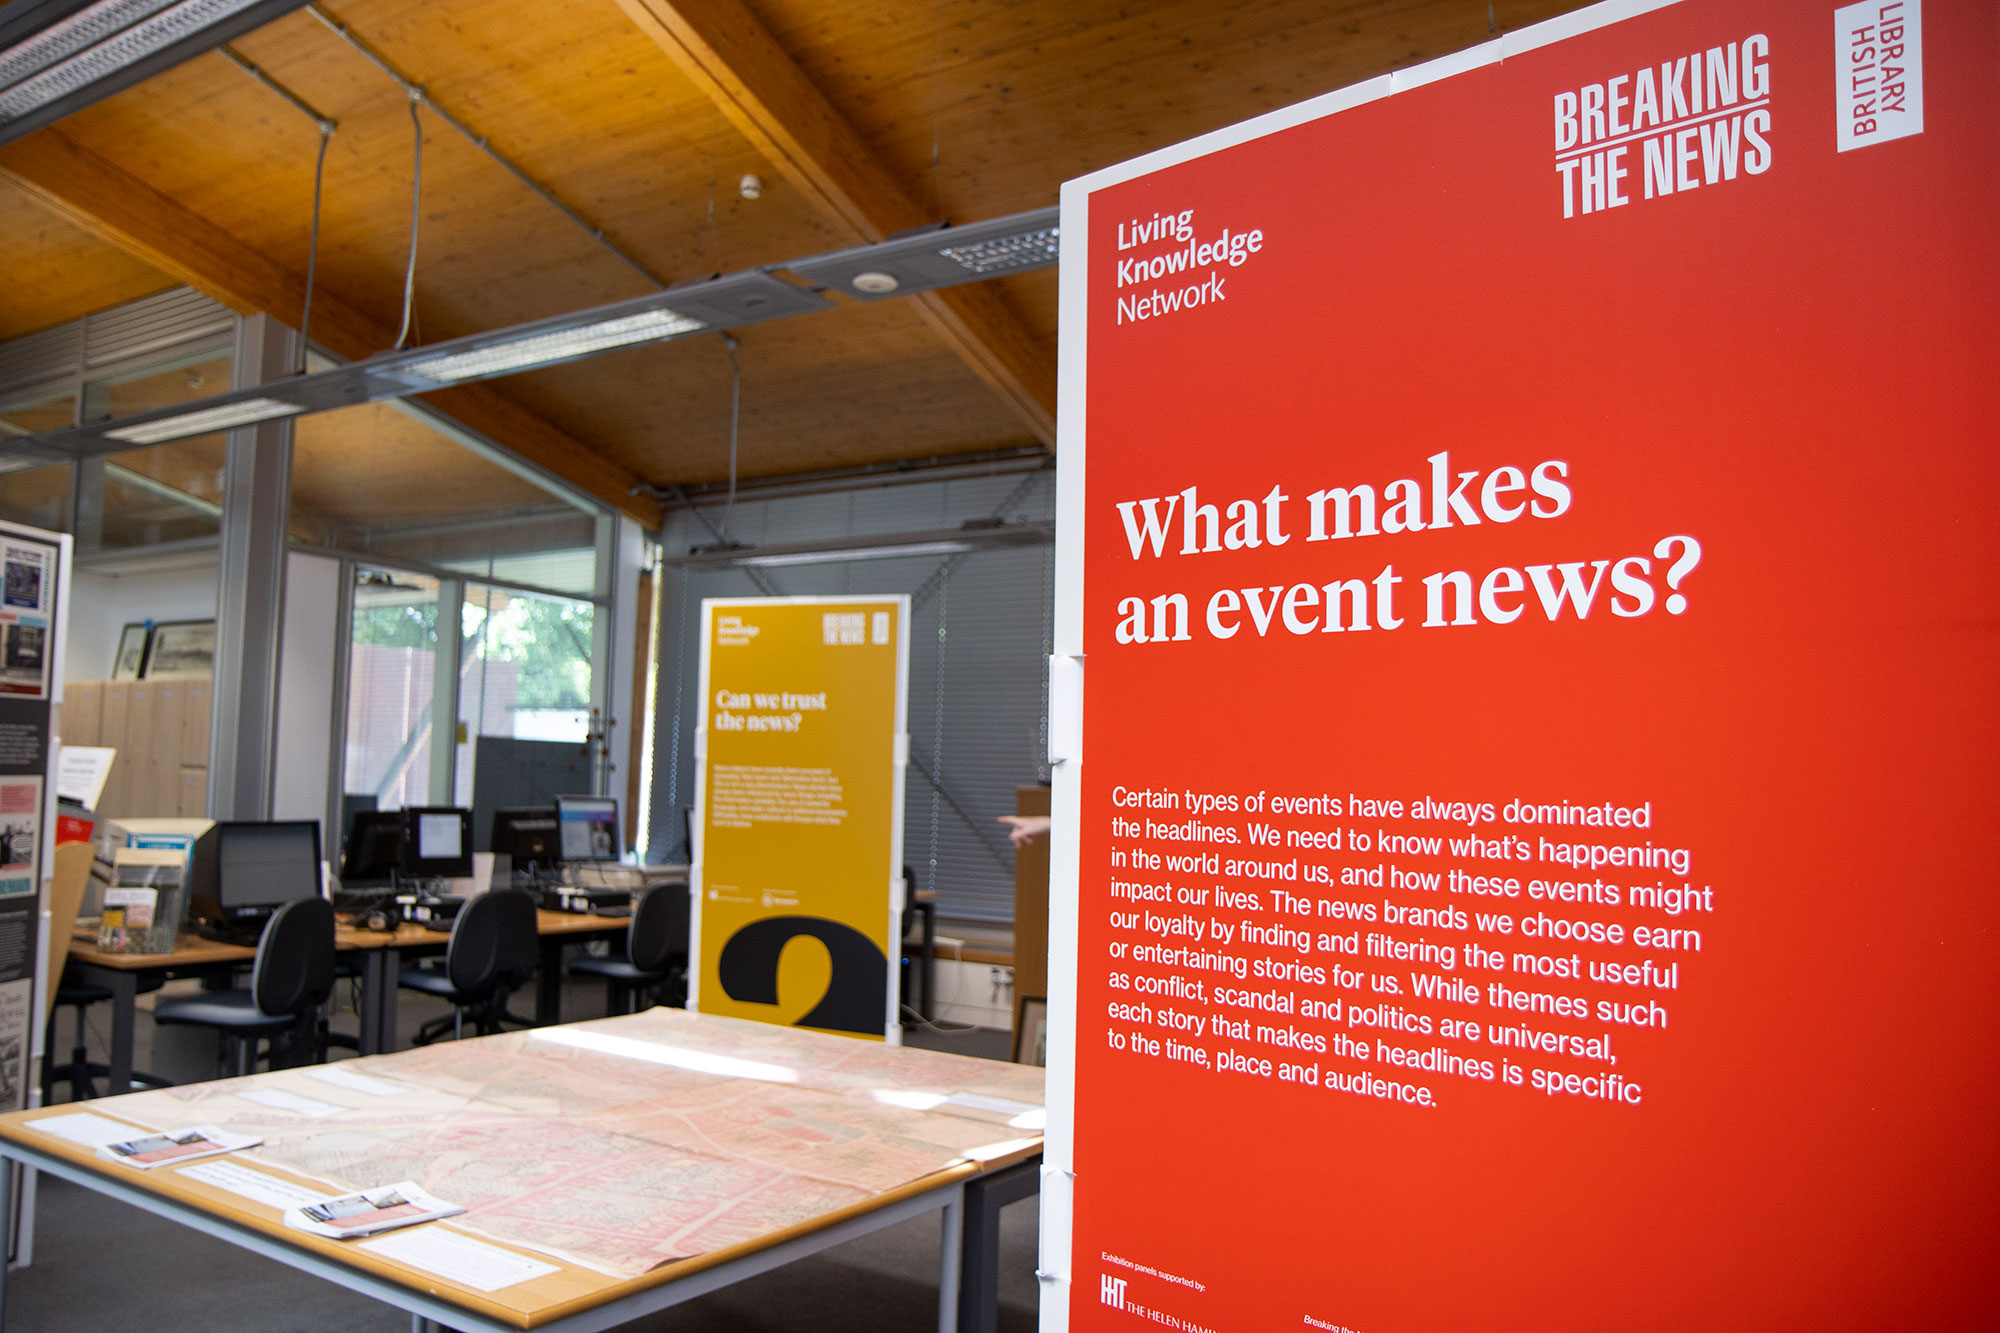 A photo of the Breaking the News exhibition in the Herbert's History Centre, with a large display board in the foreground reading, "What makes an event news?" Behind that is a table covered with a map of Coventry, and in the background is another display board with the headline, "Can we trust the news?"